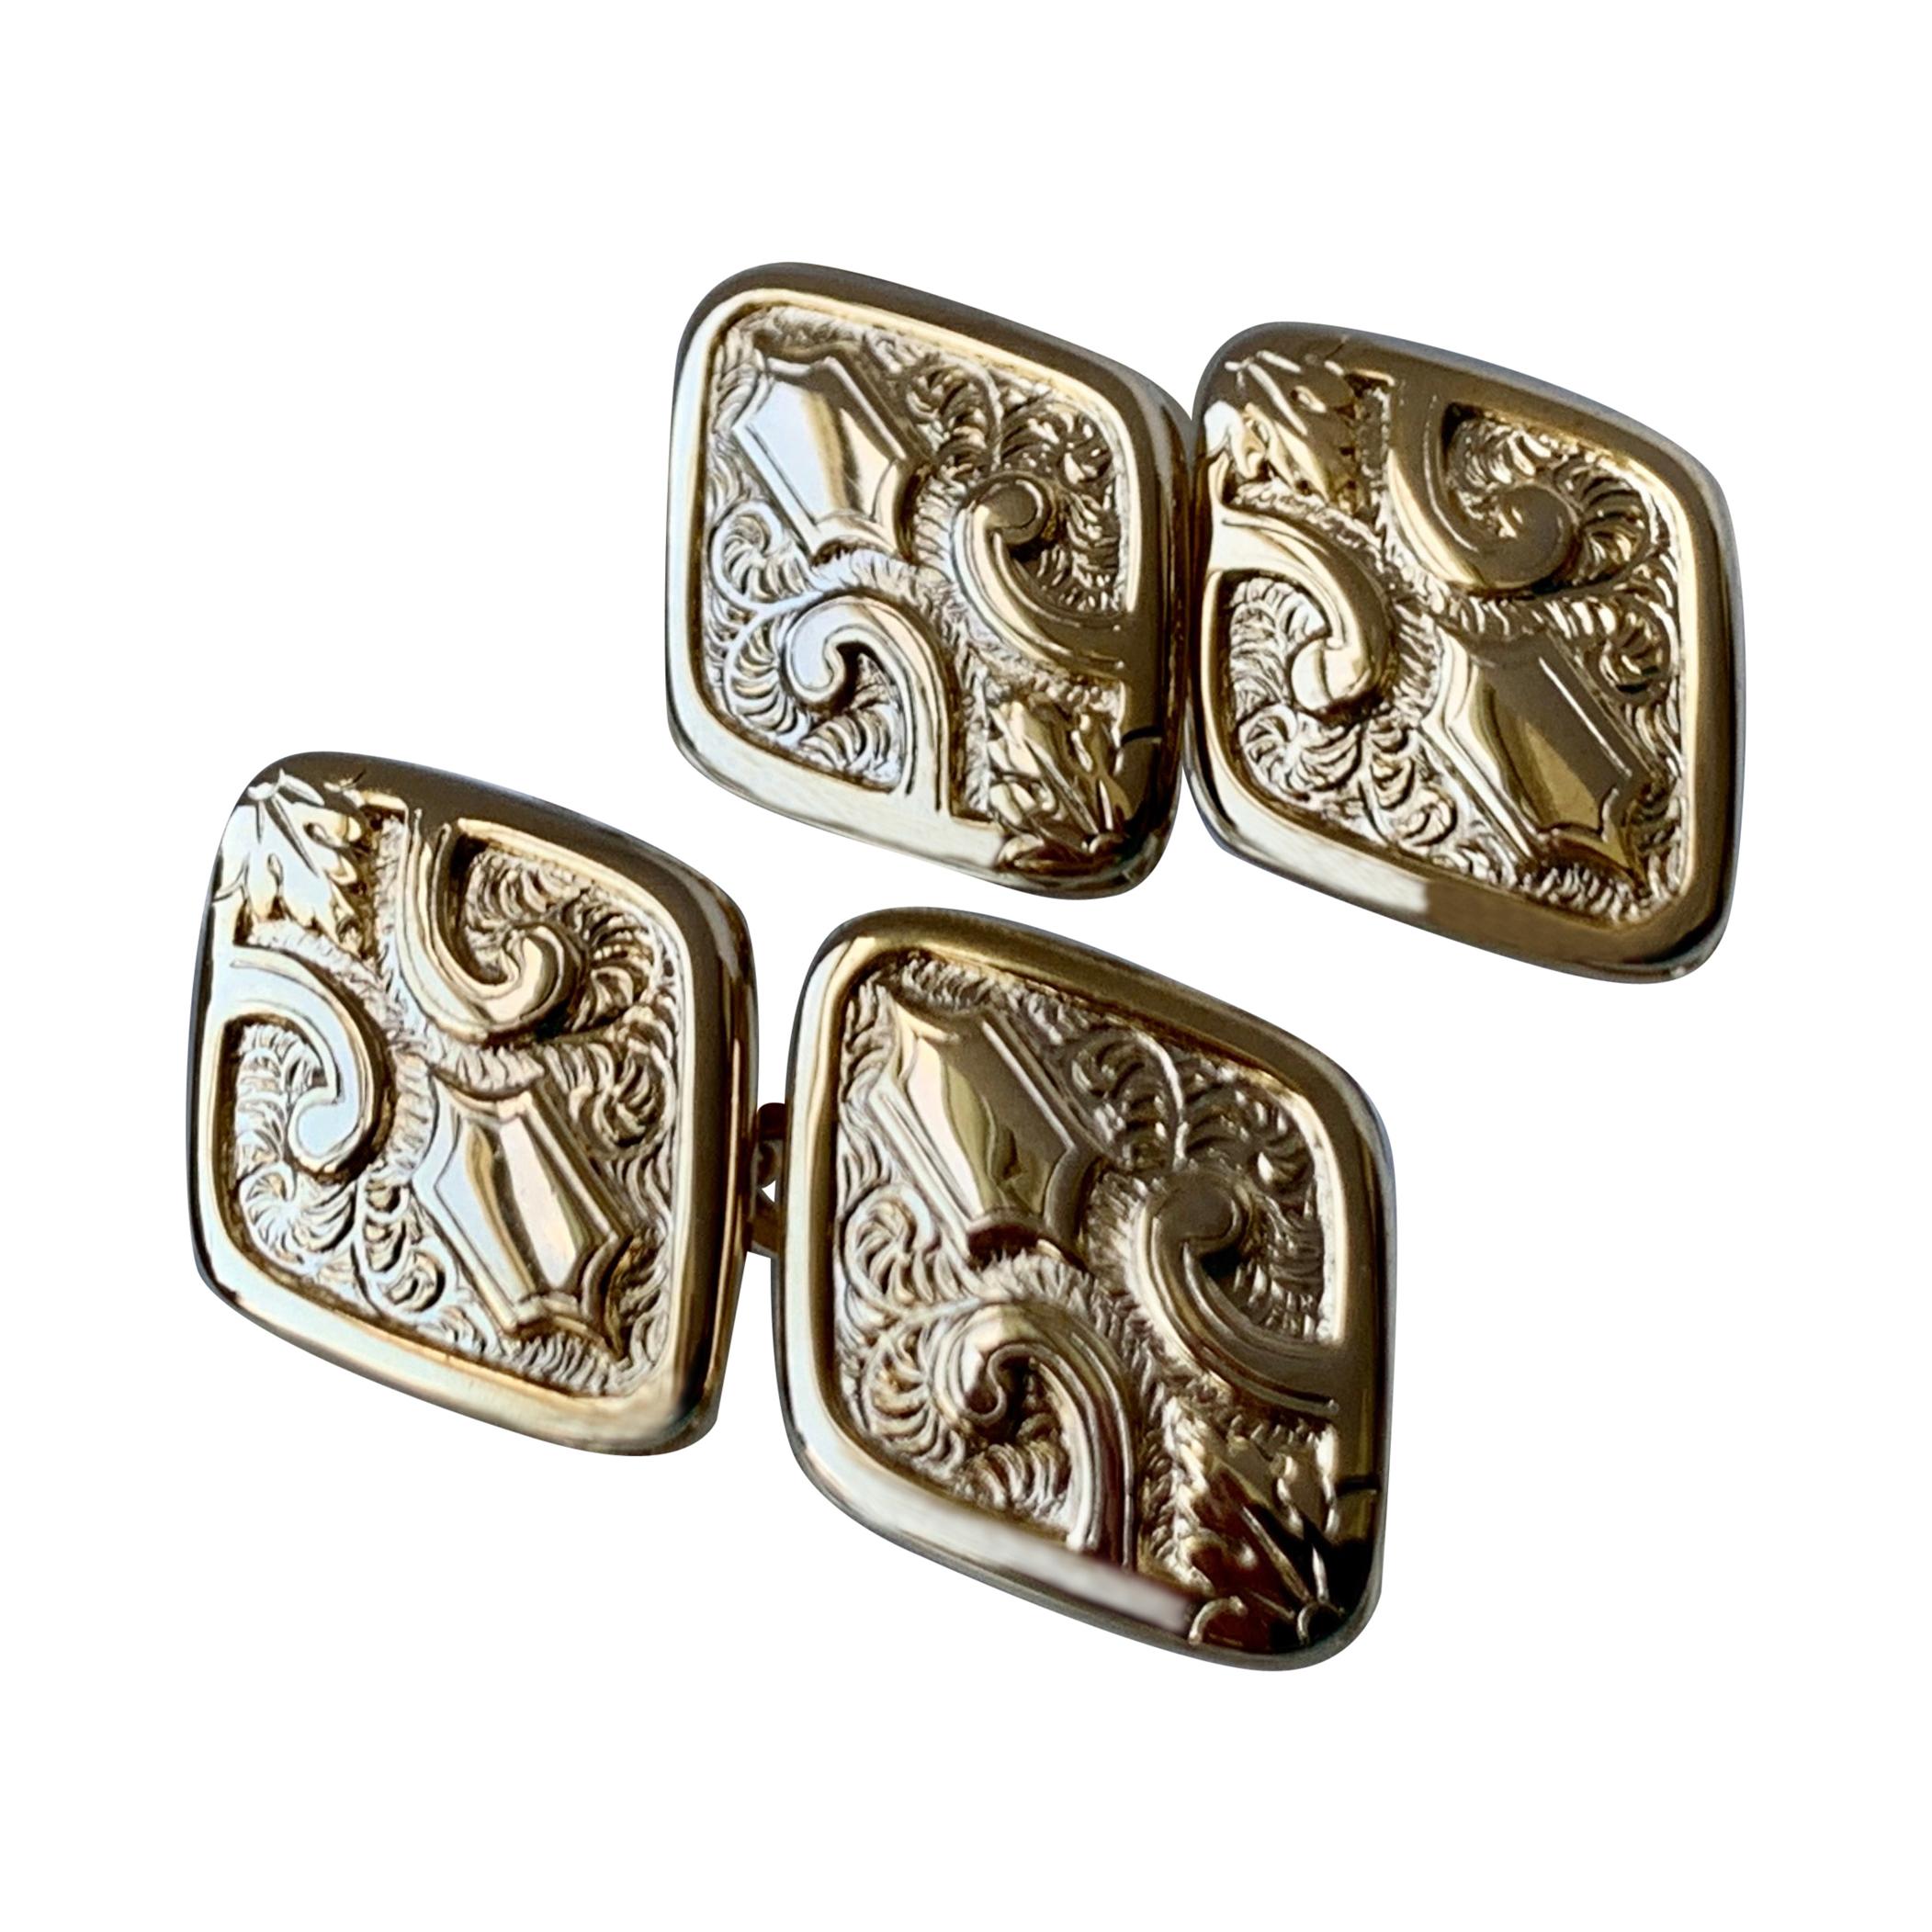 Pair of vintage gold filled double diamond shaped cufflinks with raised design.  The diamond shaped cufflinks are connected by a short chain.  This pair of links are traditional, very elegant in their simplicity and yet quite contemporary.  They